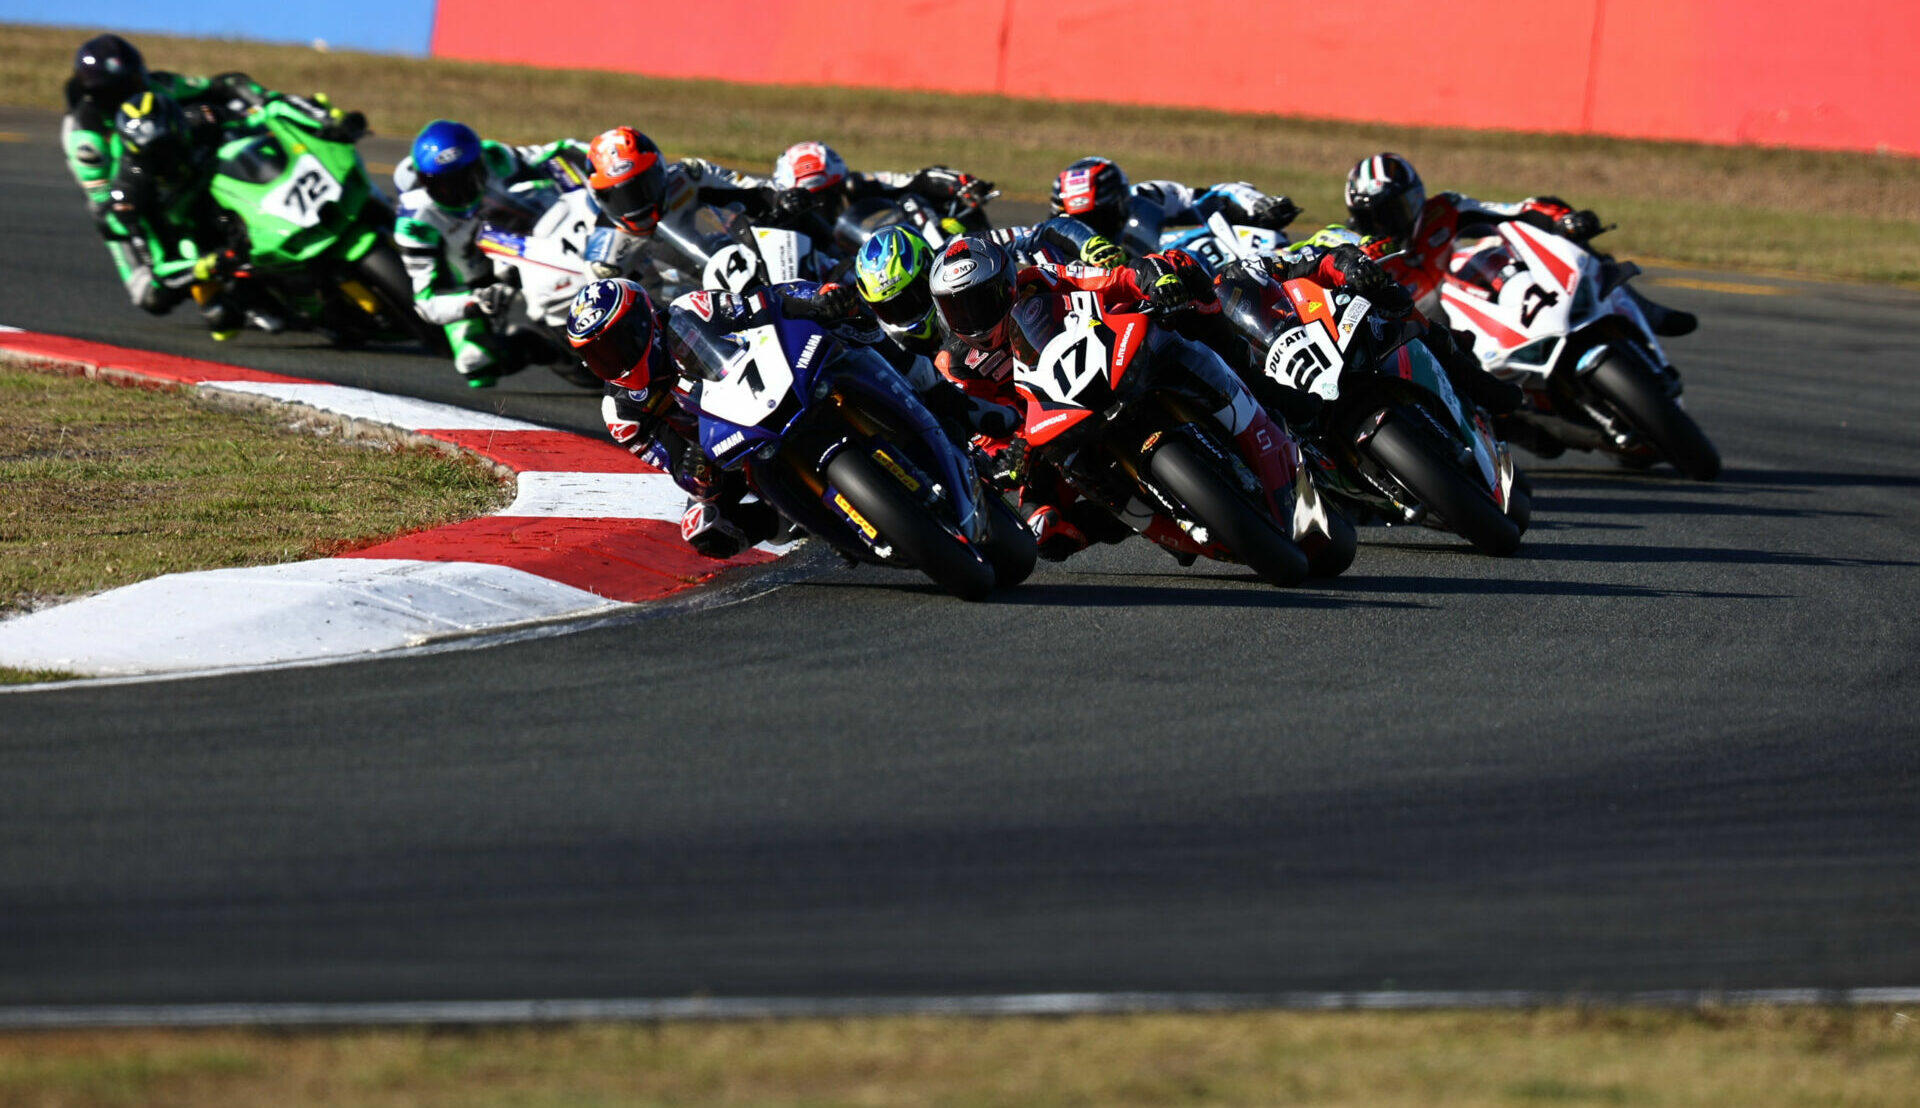 Mike Jones (1) leads Troy Herfoss (17) and the rest of the field into Turn One at Queensland Raceway. Photo courtesy ASBK.